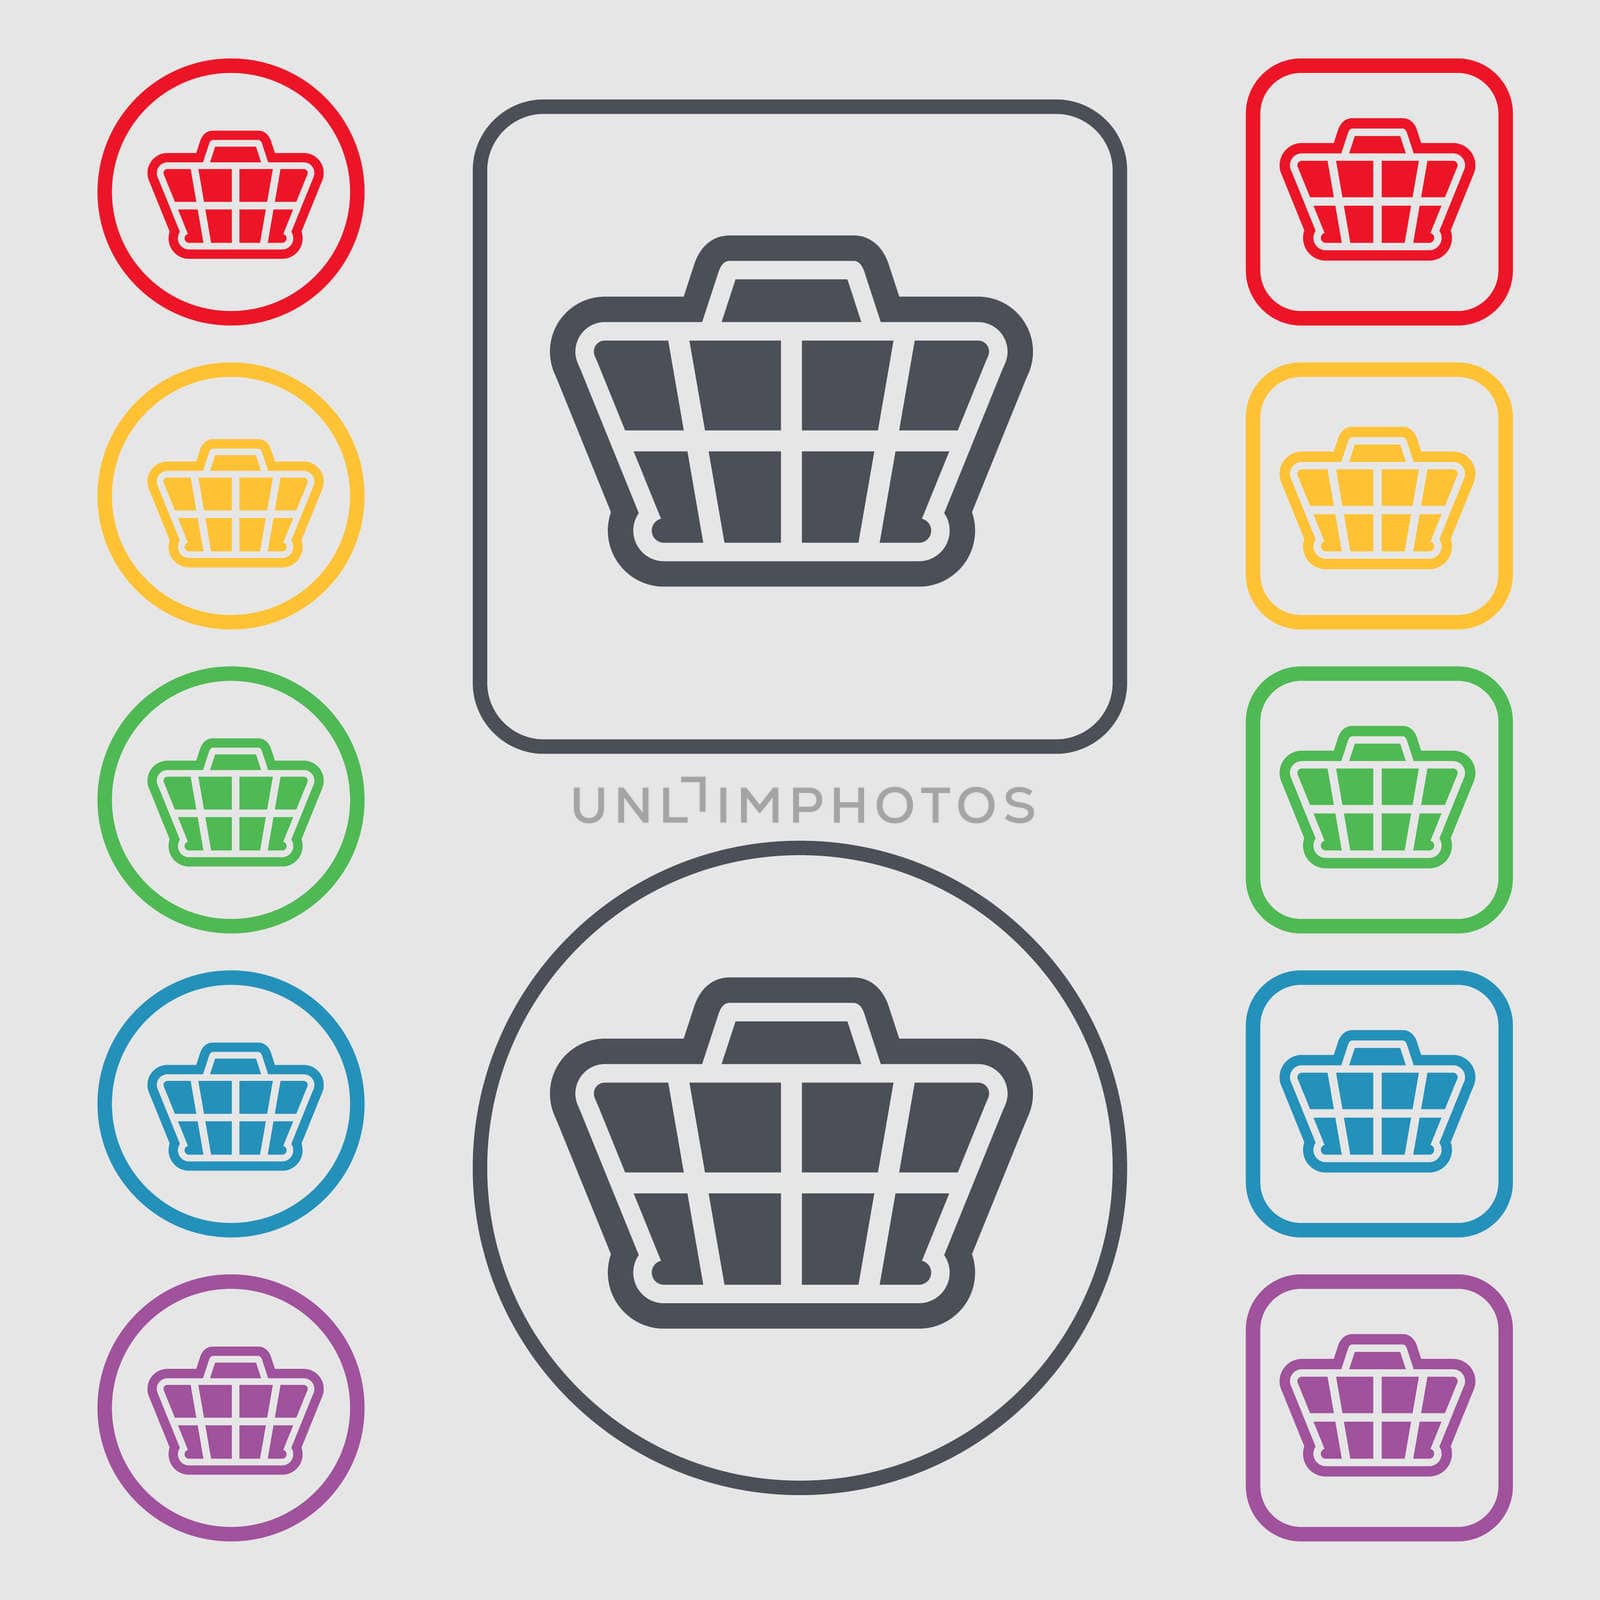 Shopping Cart icon sign. symbol on the Round and square buttons with frame. illustration